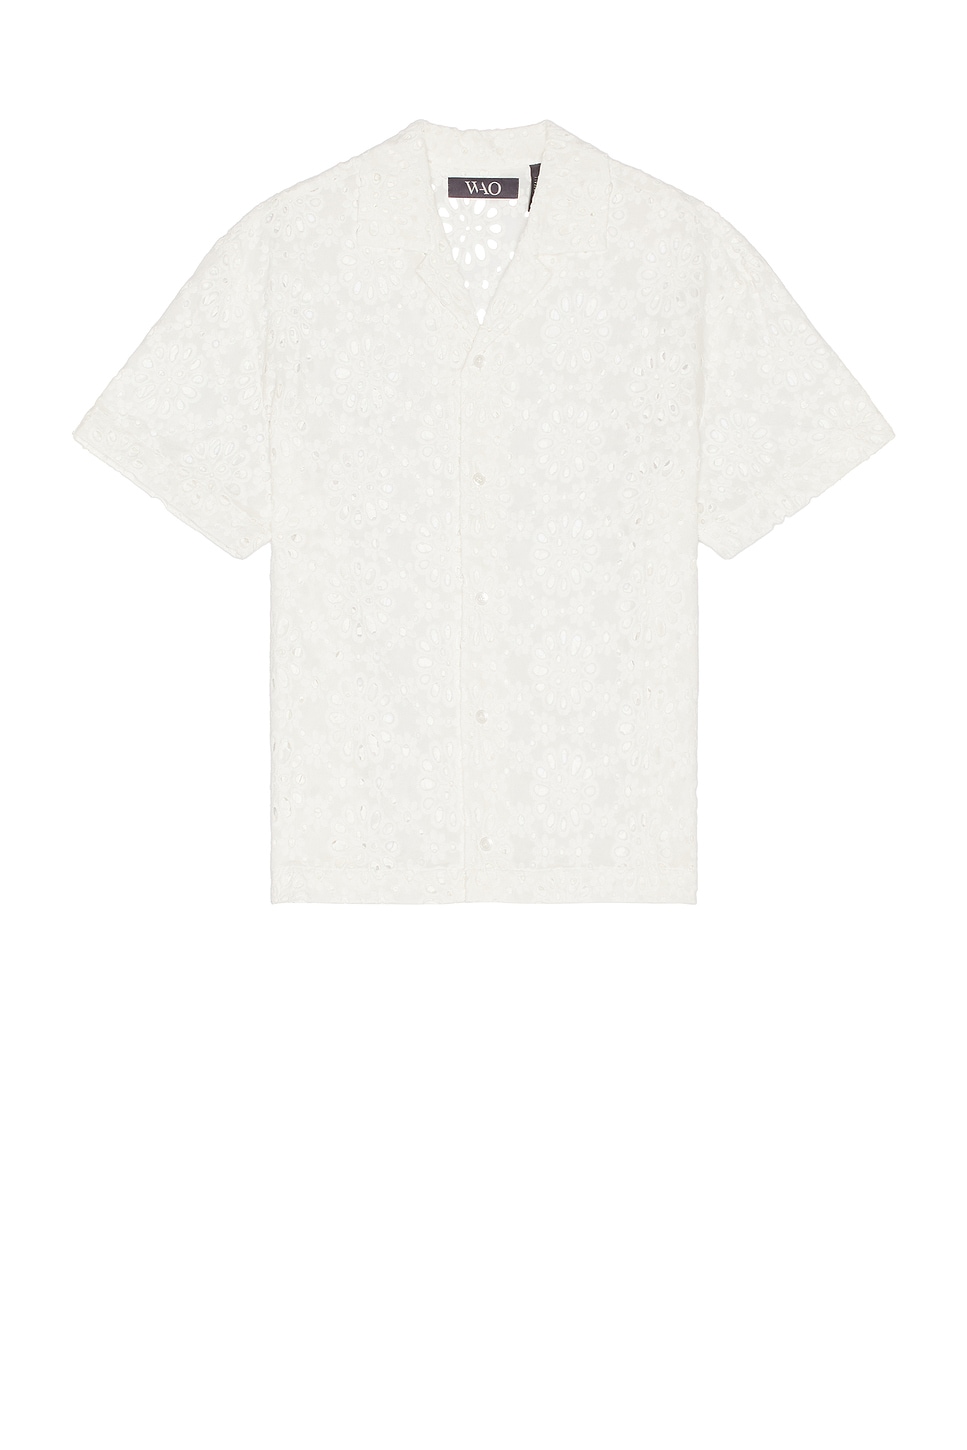 Image 1 of WAO Embroidered Floral Shirt in White